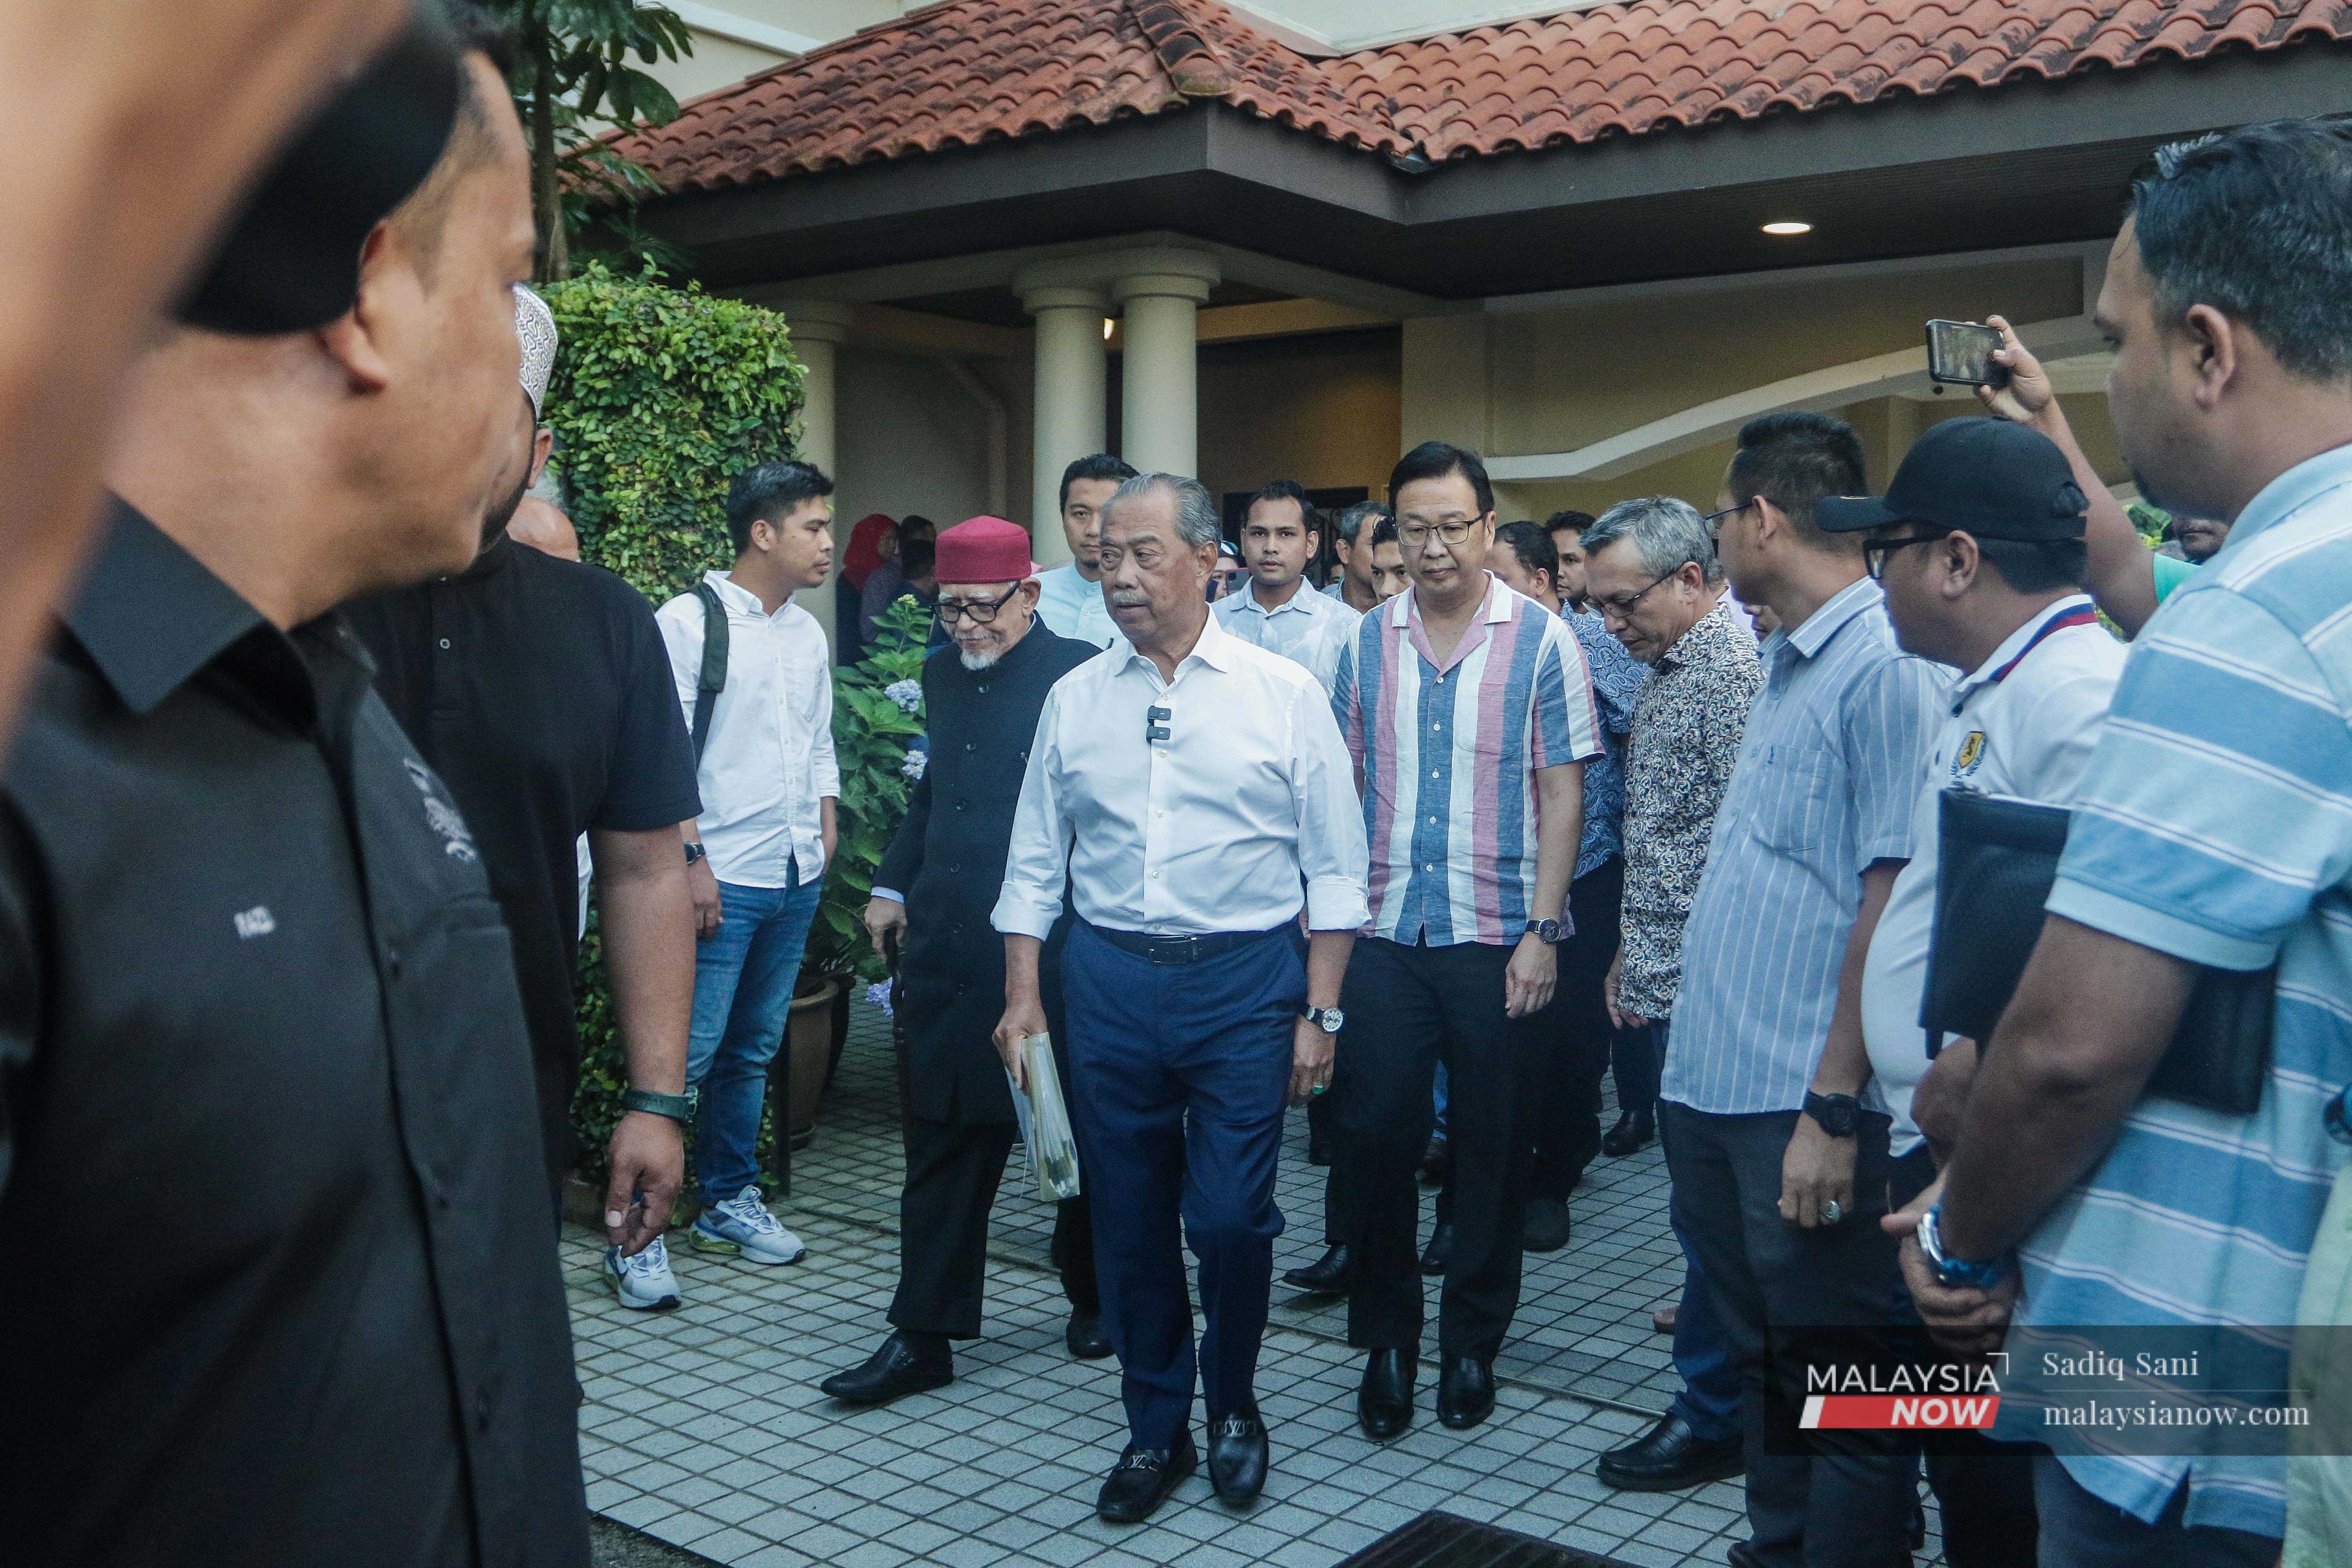 Perikatan Nasional chairman Muhyiddin Yassin speaks at a separate press conference at which he said he had refused to join hands with Pakatan Harapan as part of a palace proposal for a unity government. 